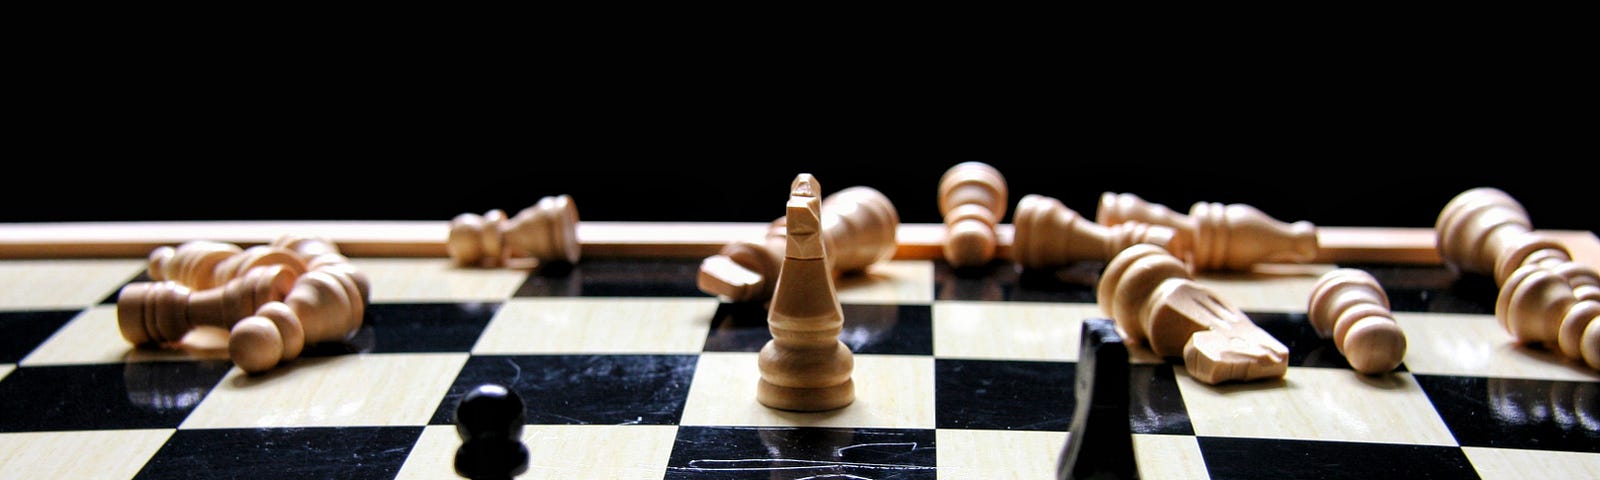 Chessboard: When Losing Favor is God’s Perfect Plan